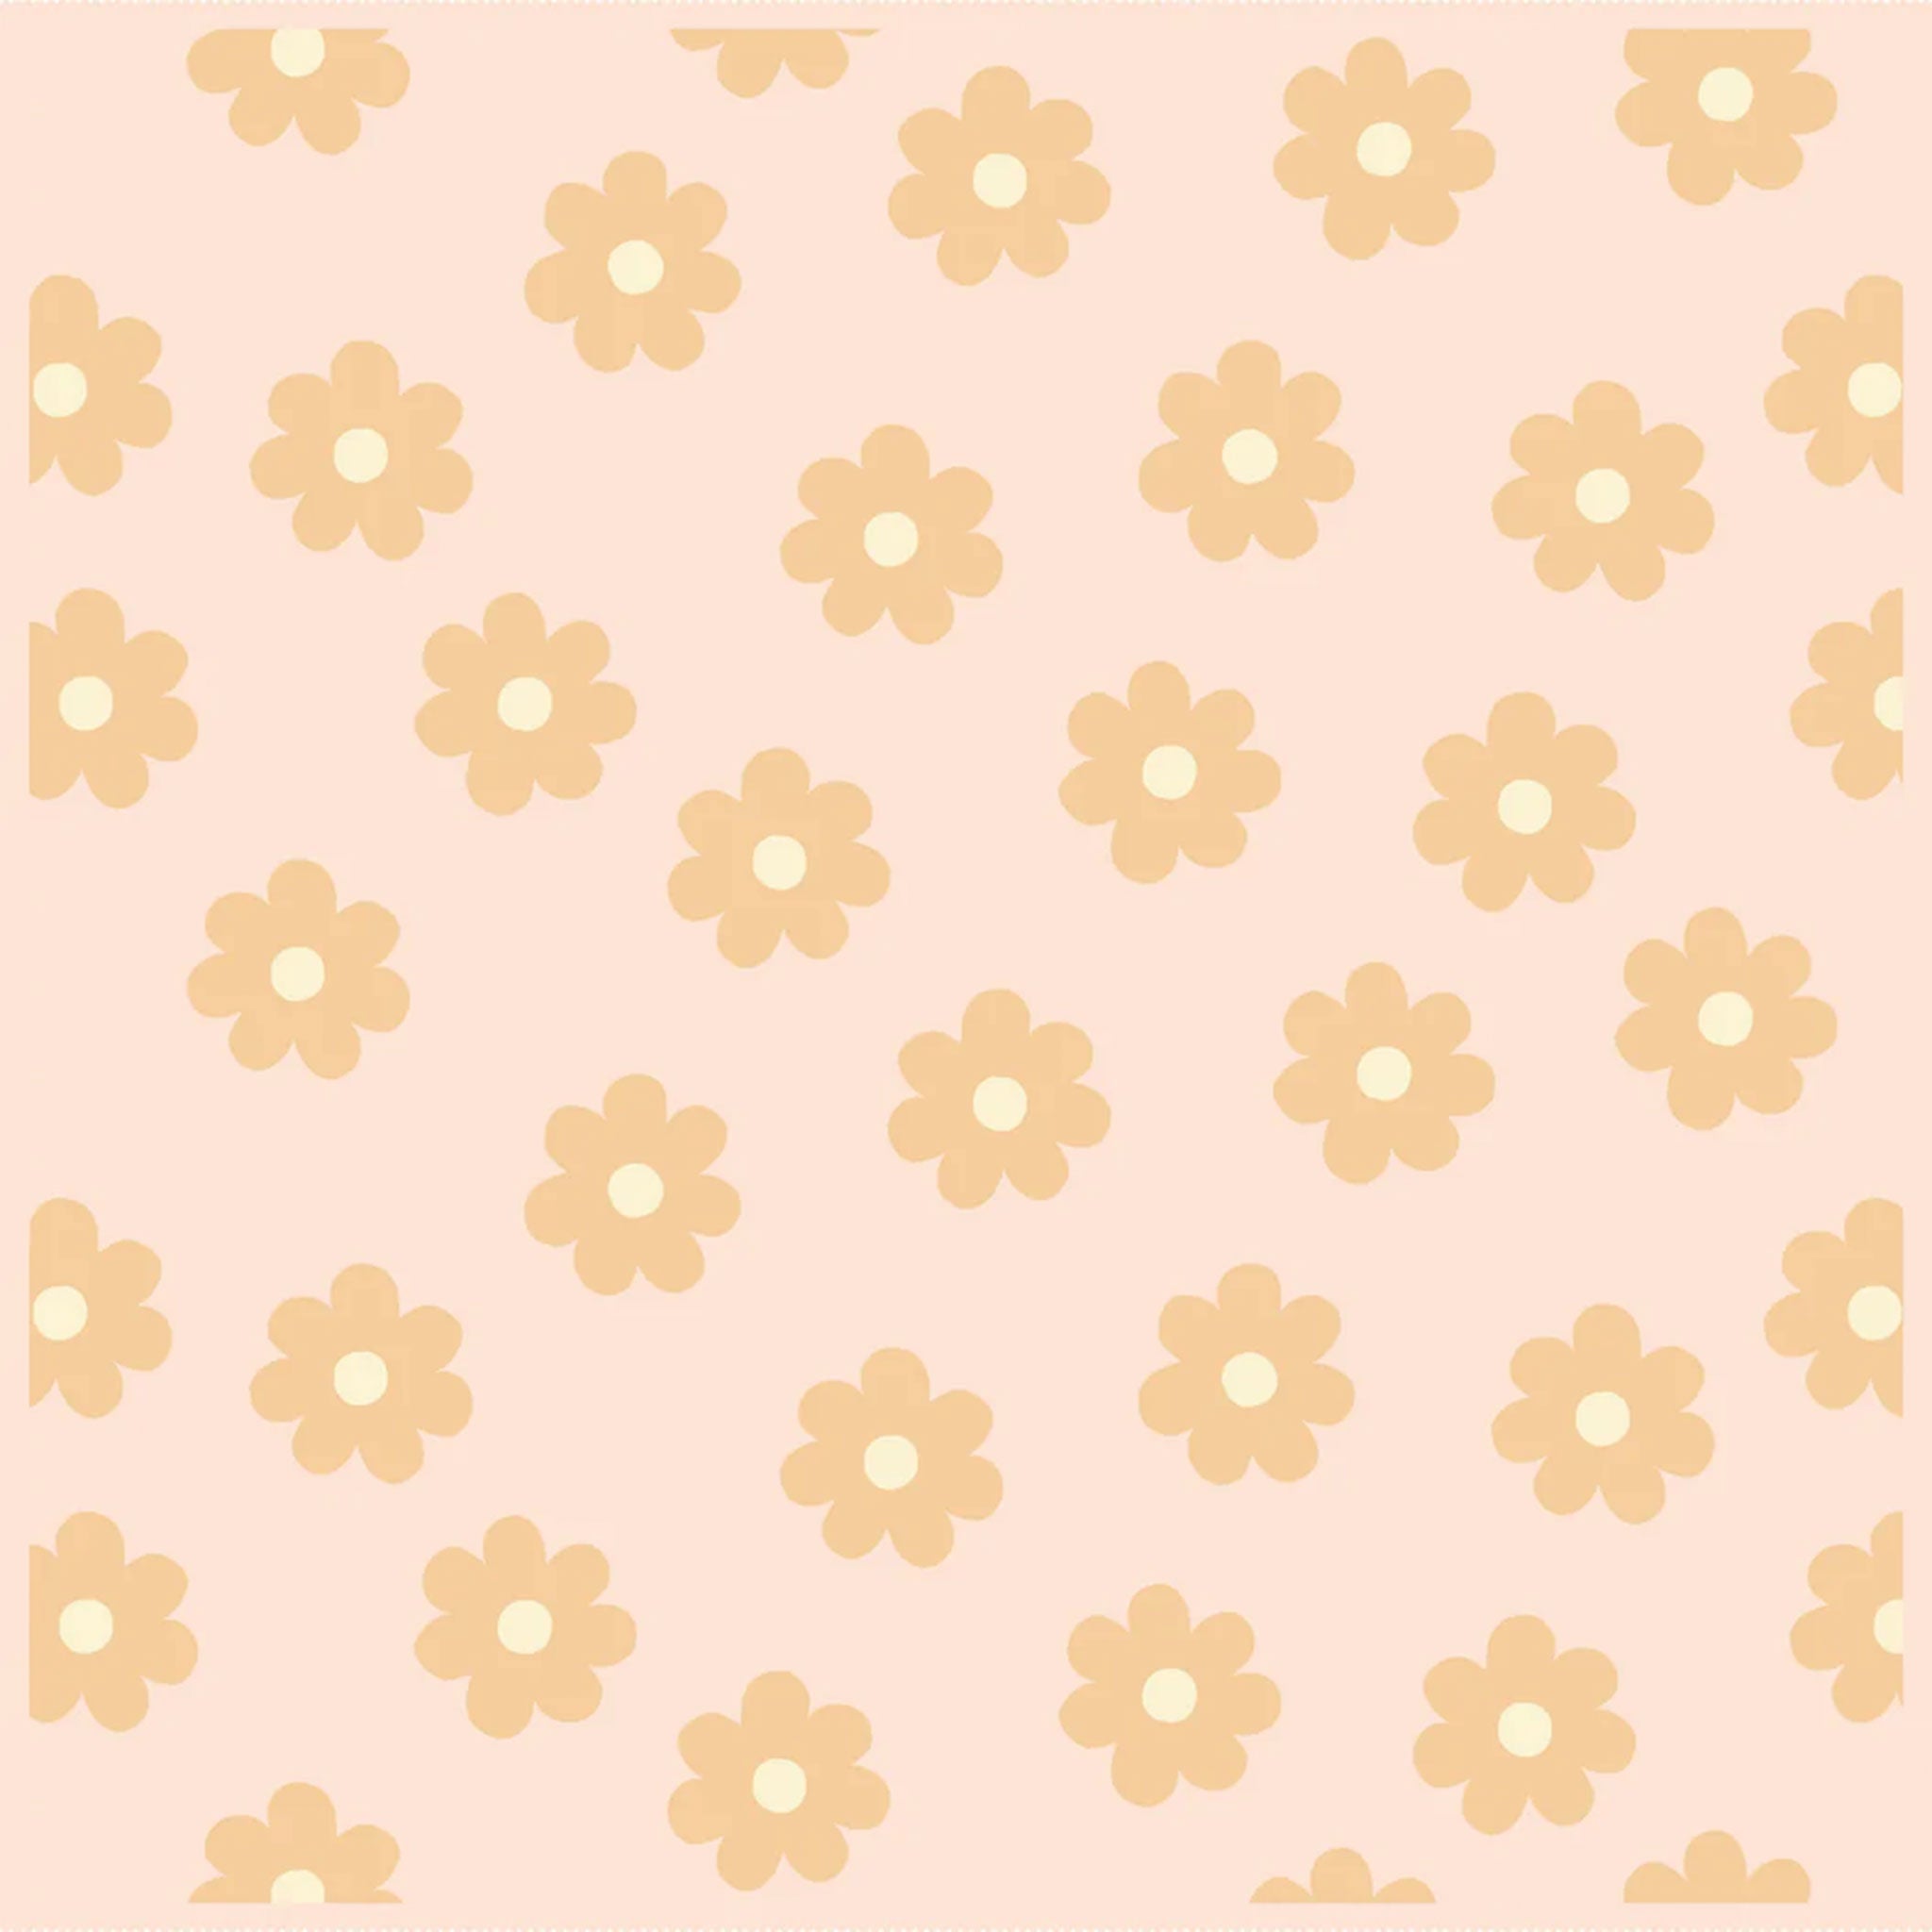 A light blush cotton blanket with a repeating mustard yellow daisy print.